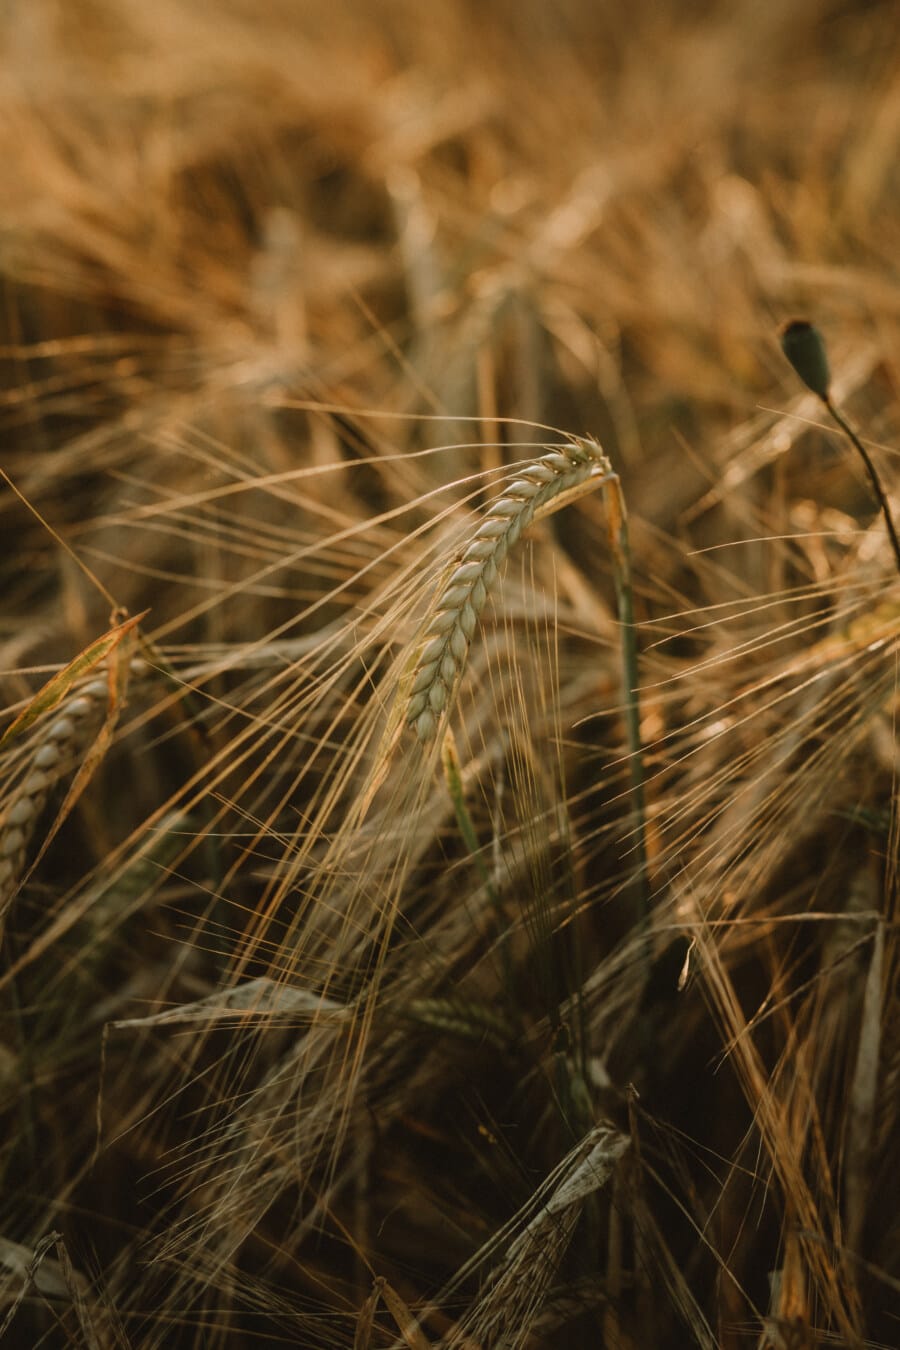 straw, close-up, wheat, wheatfield, herb, stem, growing, rural, cereal, grain